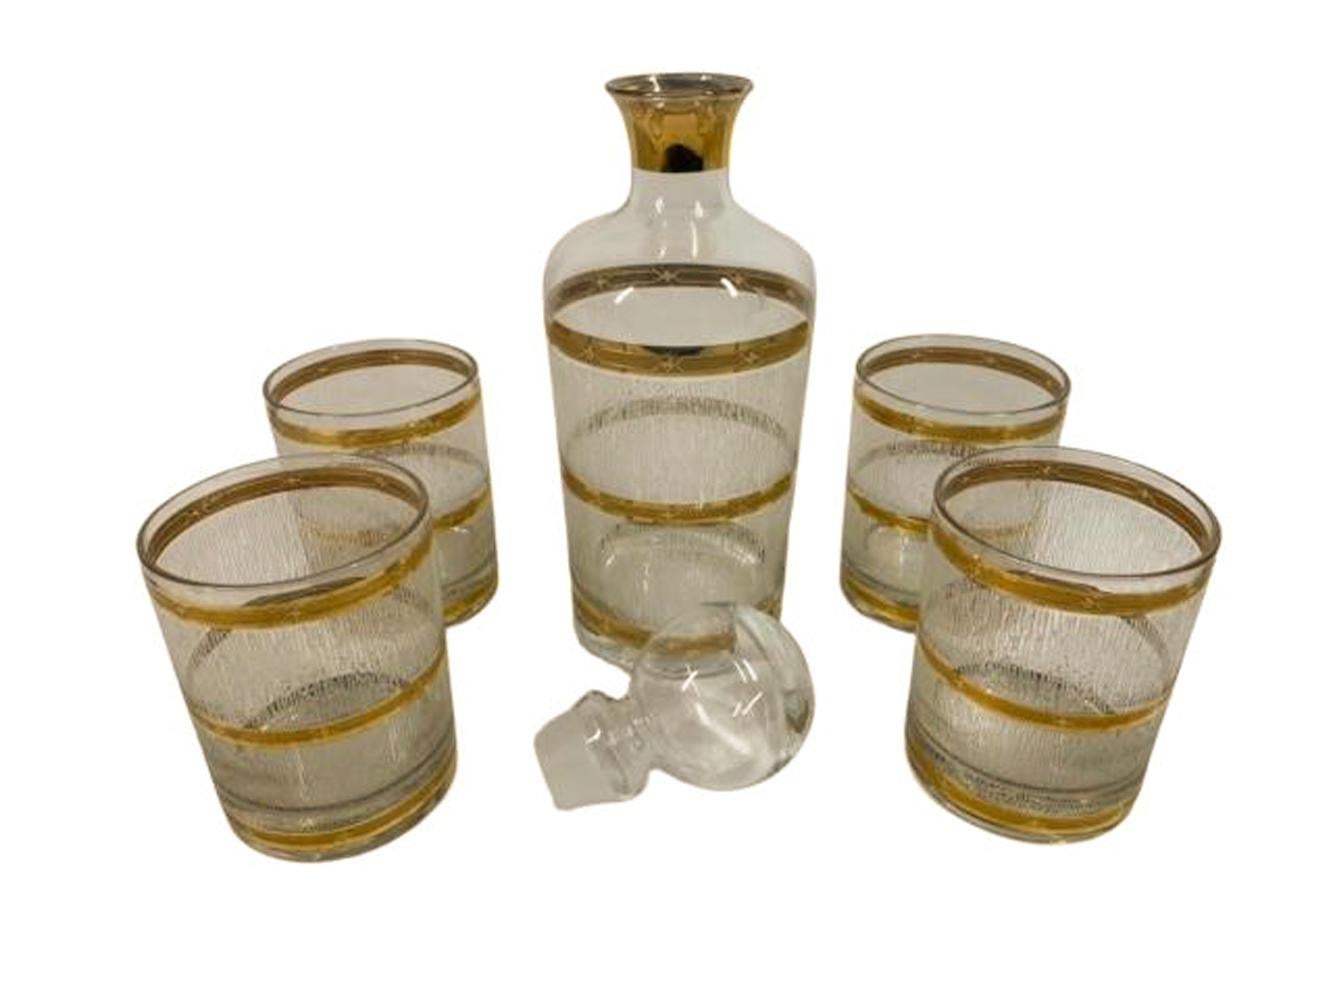 Vintage decanter and four rocks glasses by Culver LTD in the 